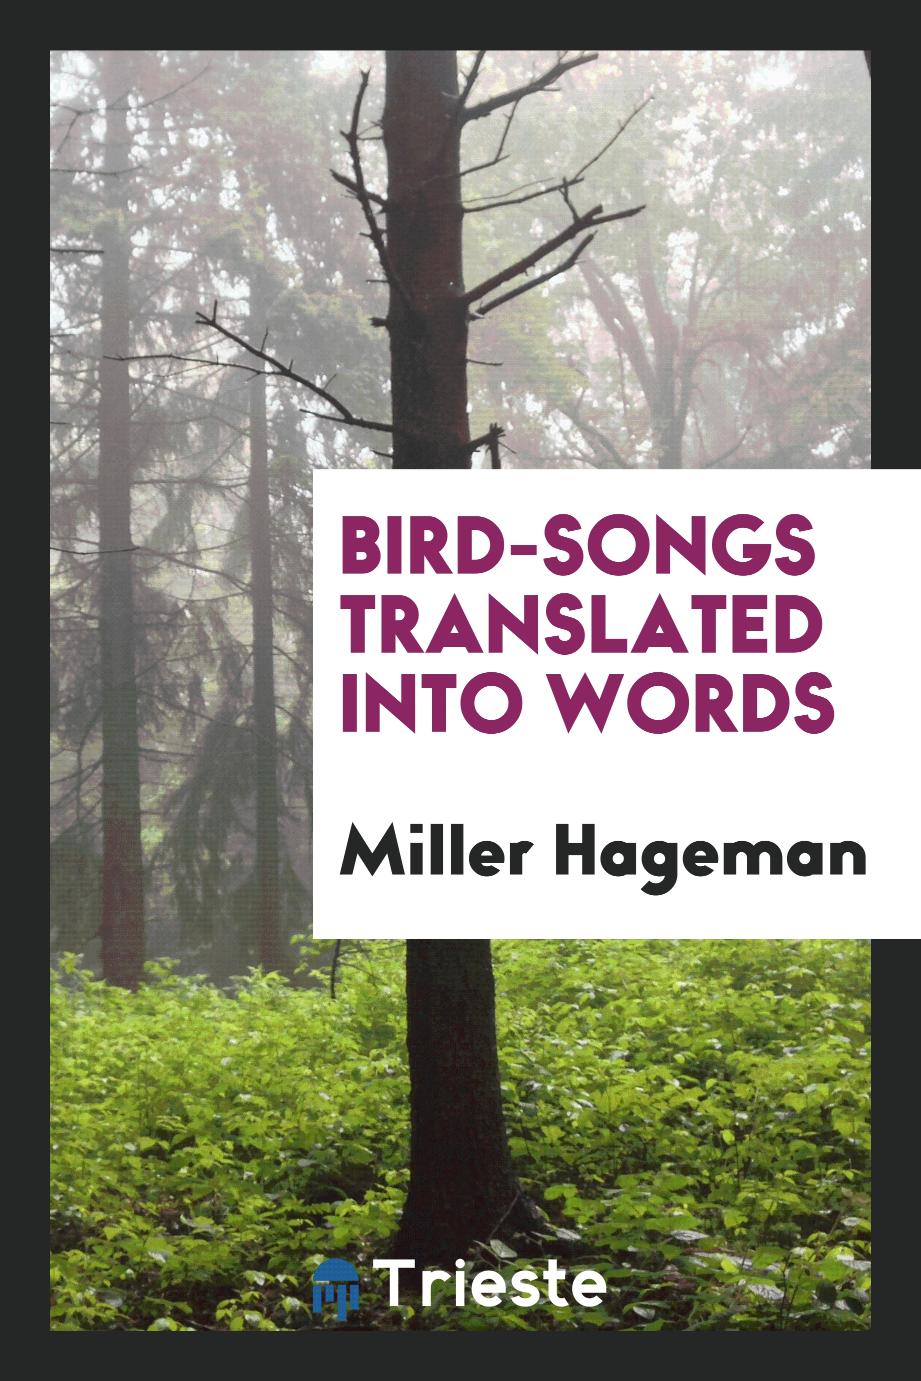 Bird-Songs Translated into Words